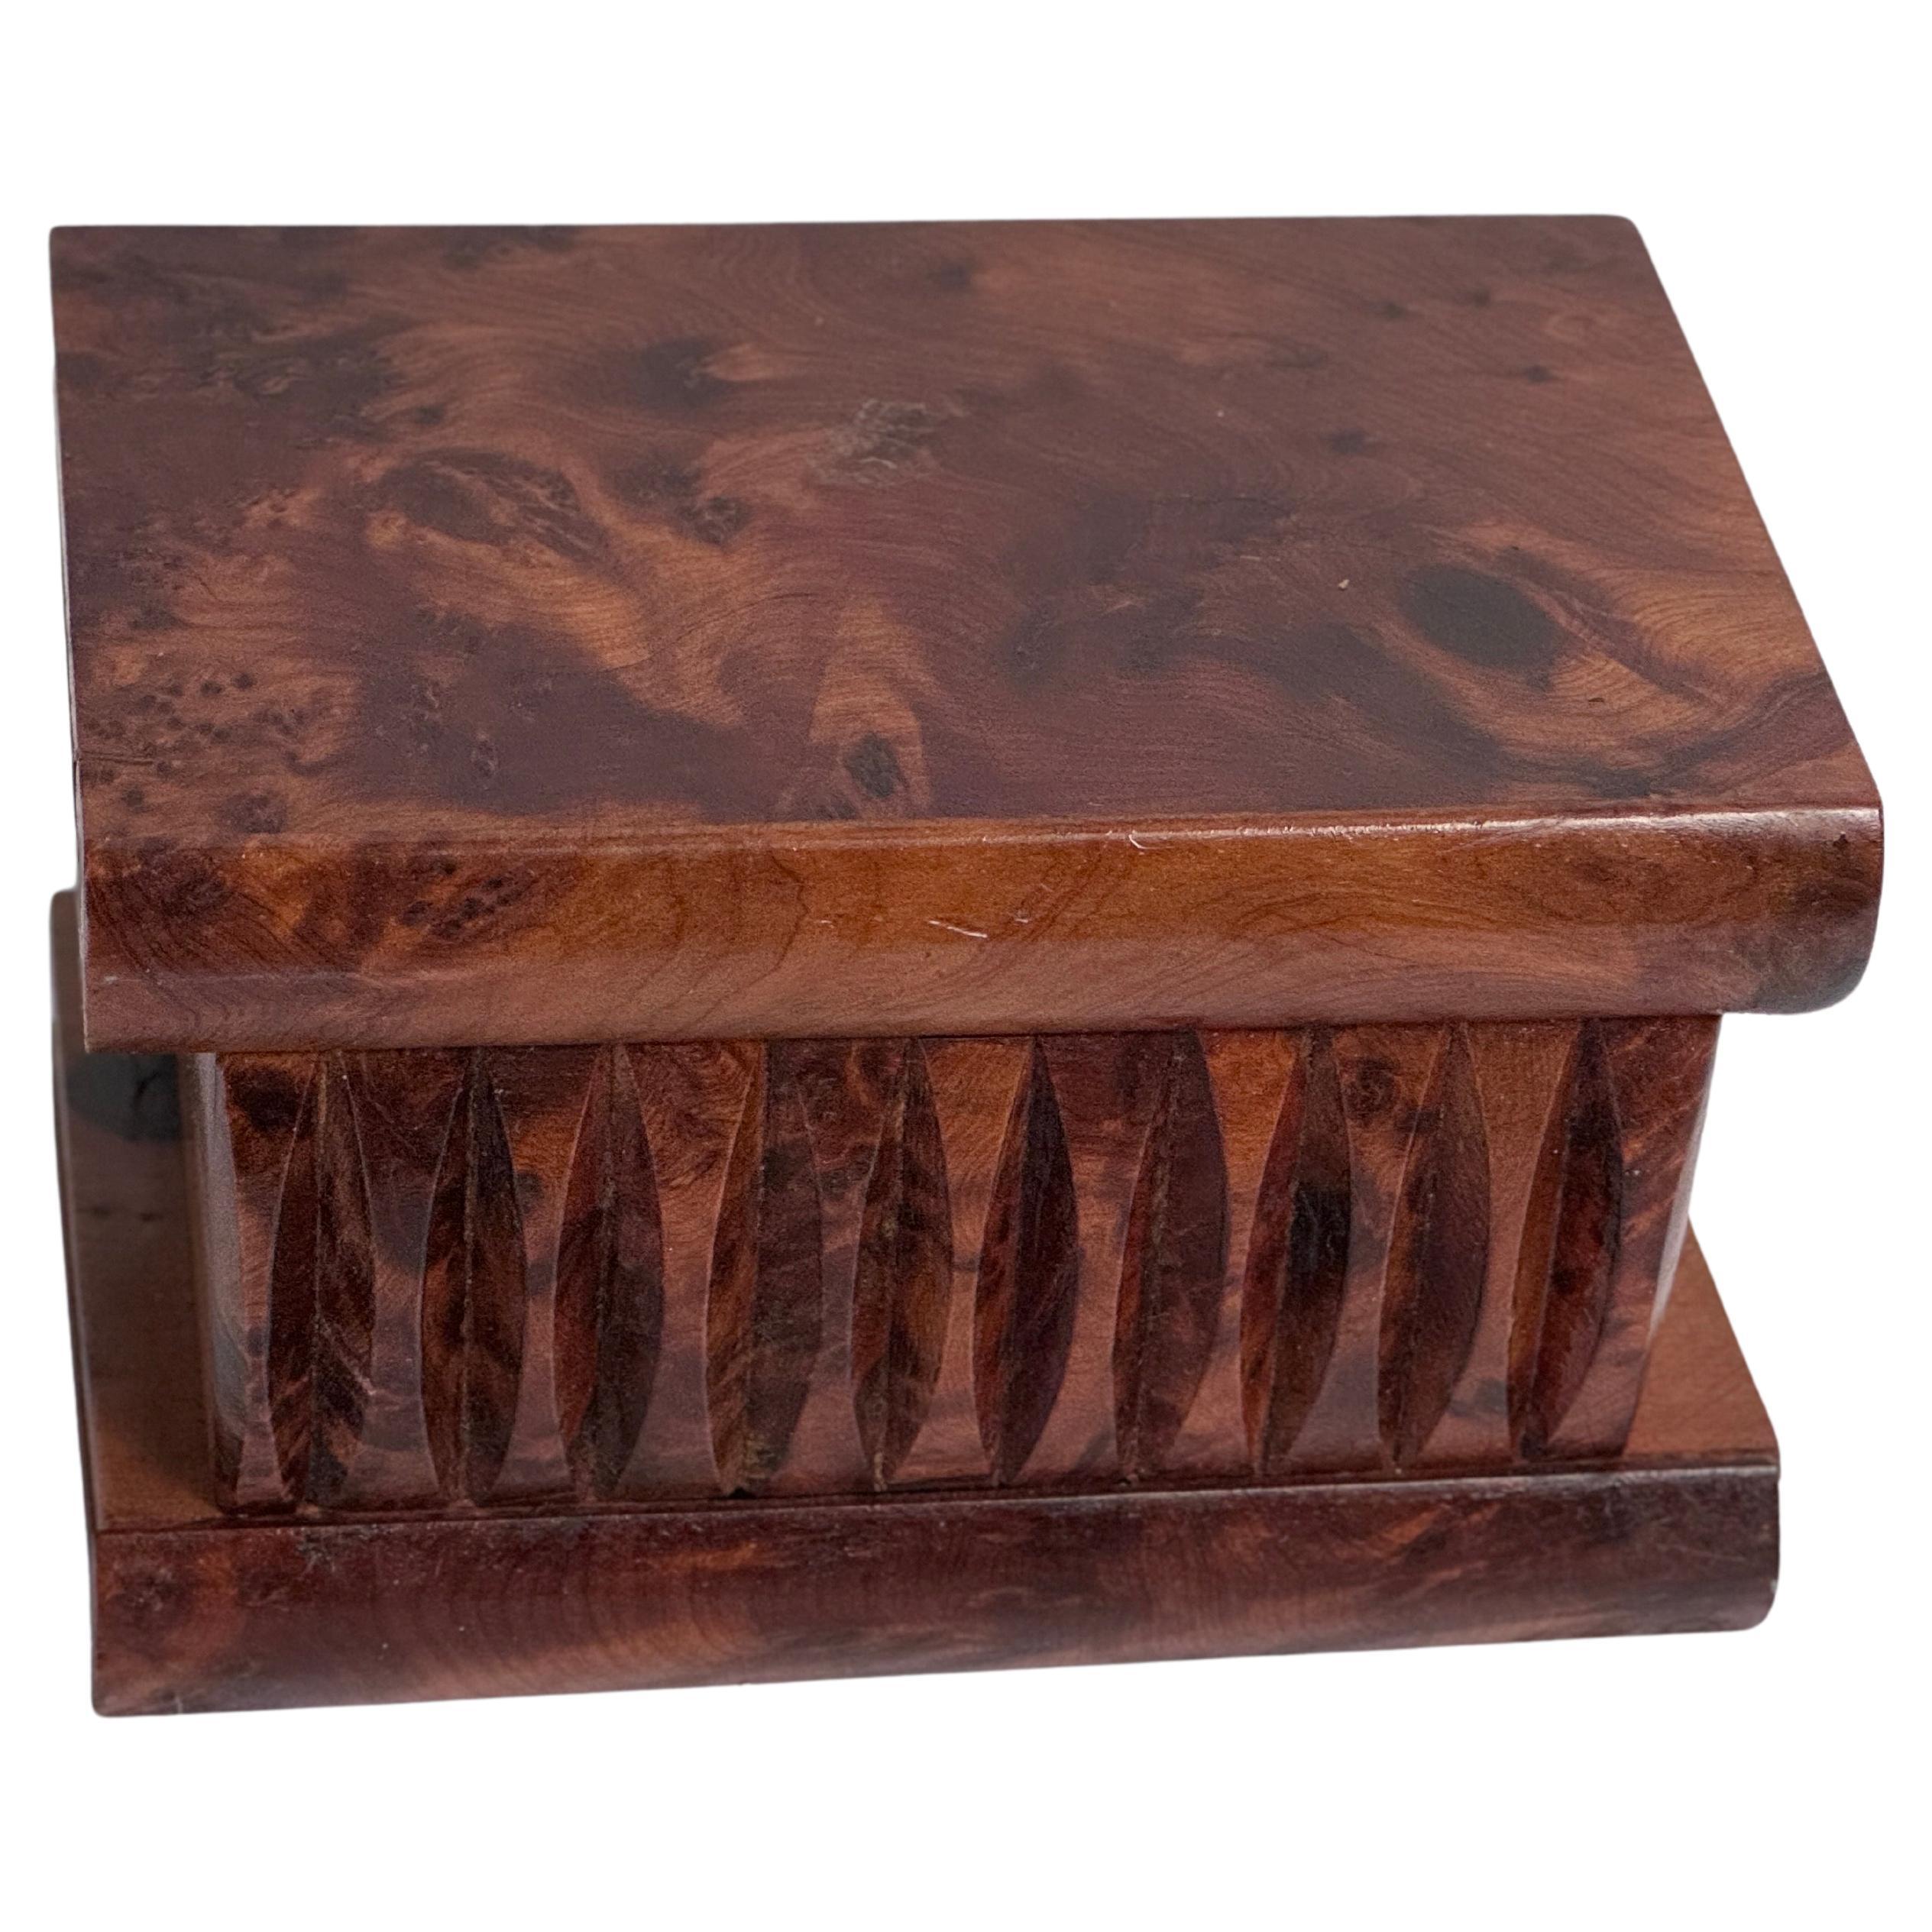 Box in Burled Wood, Brown Color, France, 20th Century